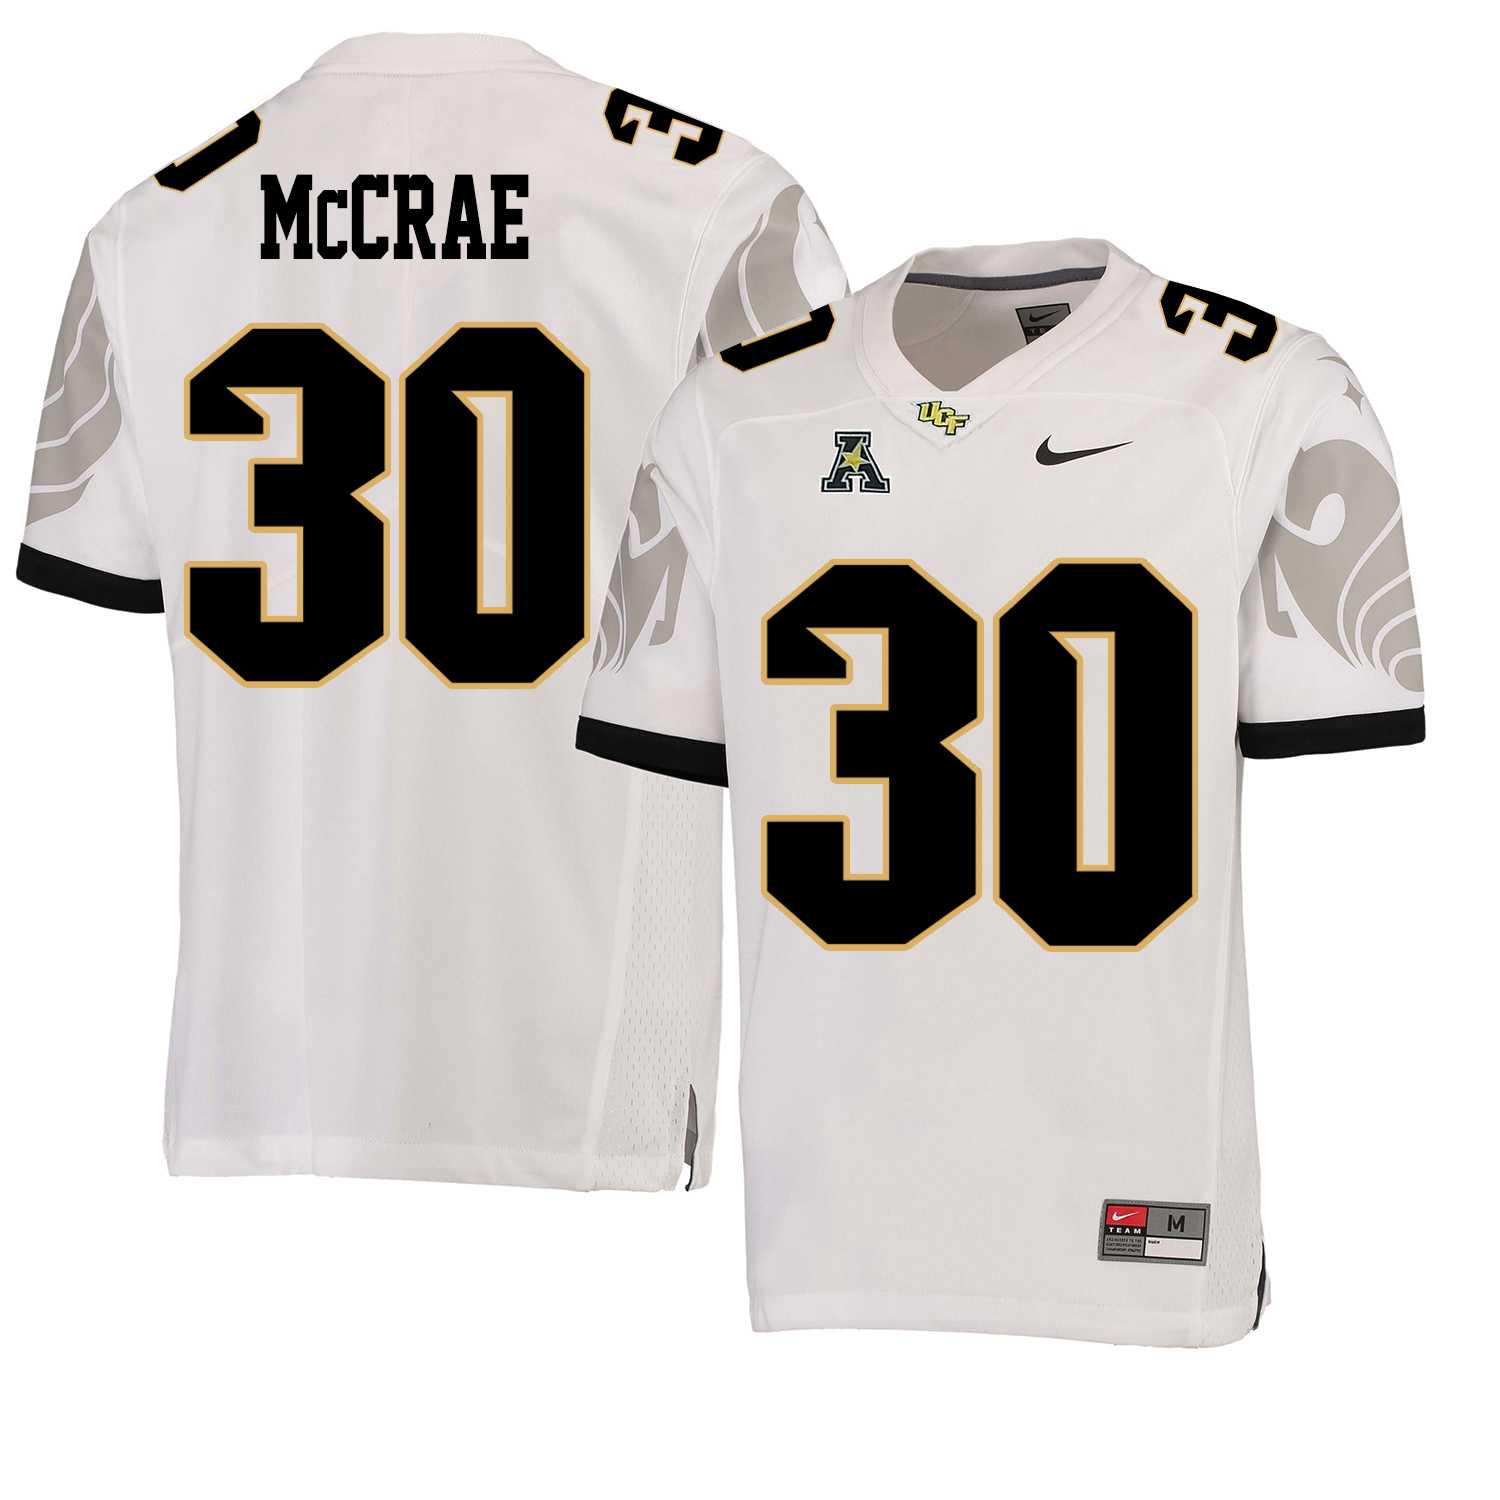 UCF Knights 30 Greg McCrae White College Football Jersey DingZhi